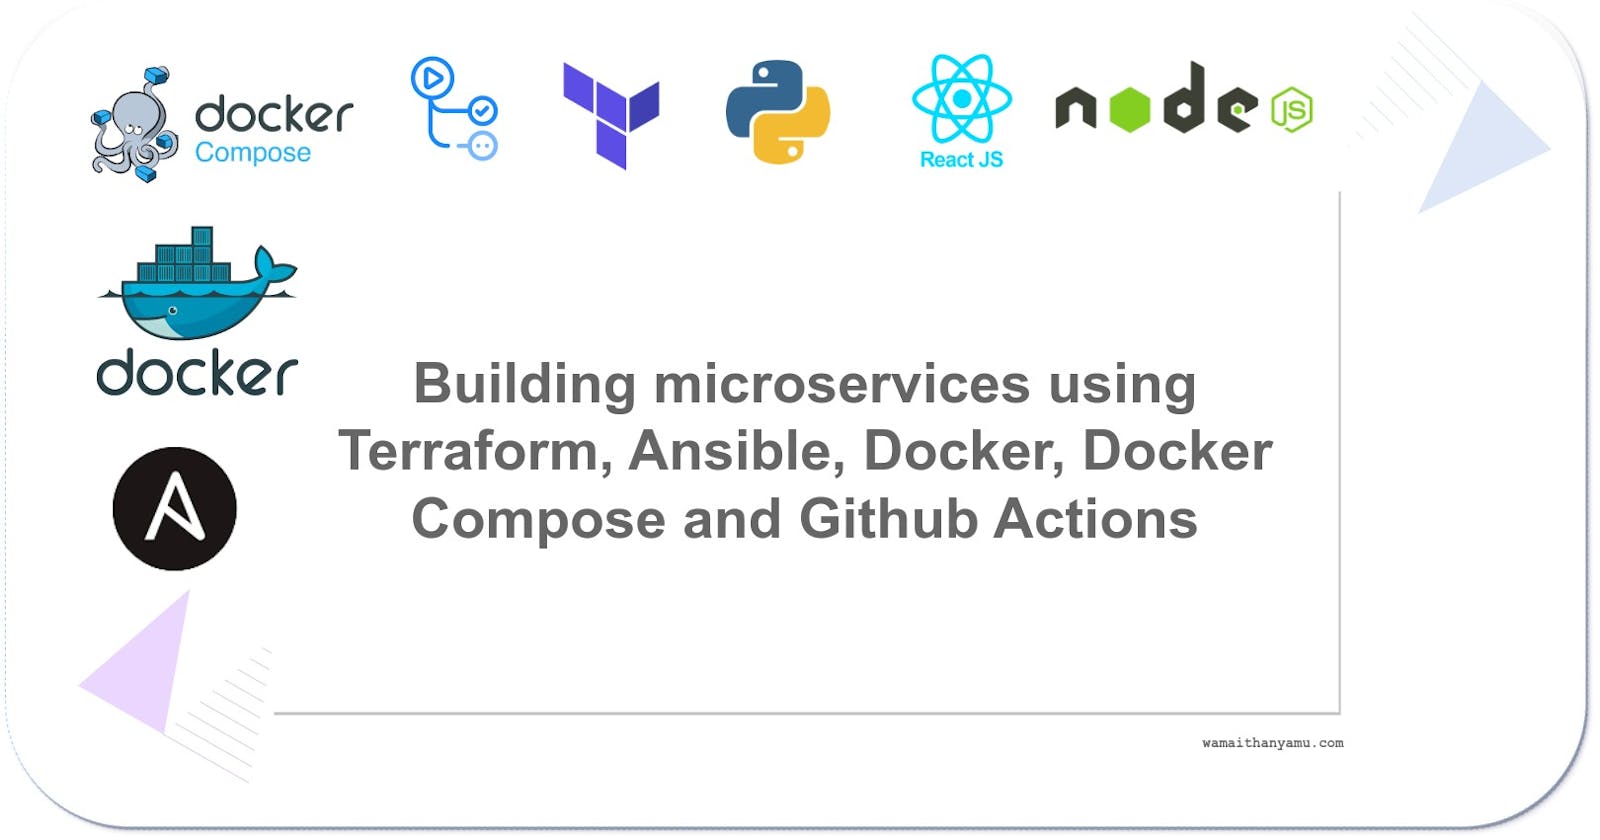 Building microservices using Terraform, Ansible, Docker, Docker Compose, and Github Actions.